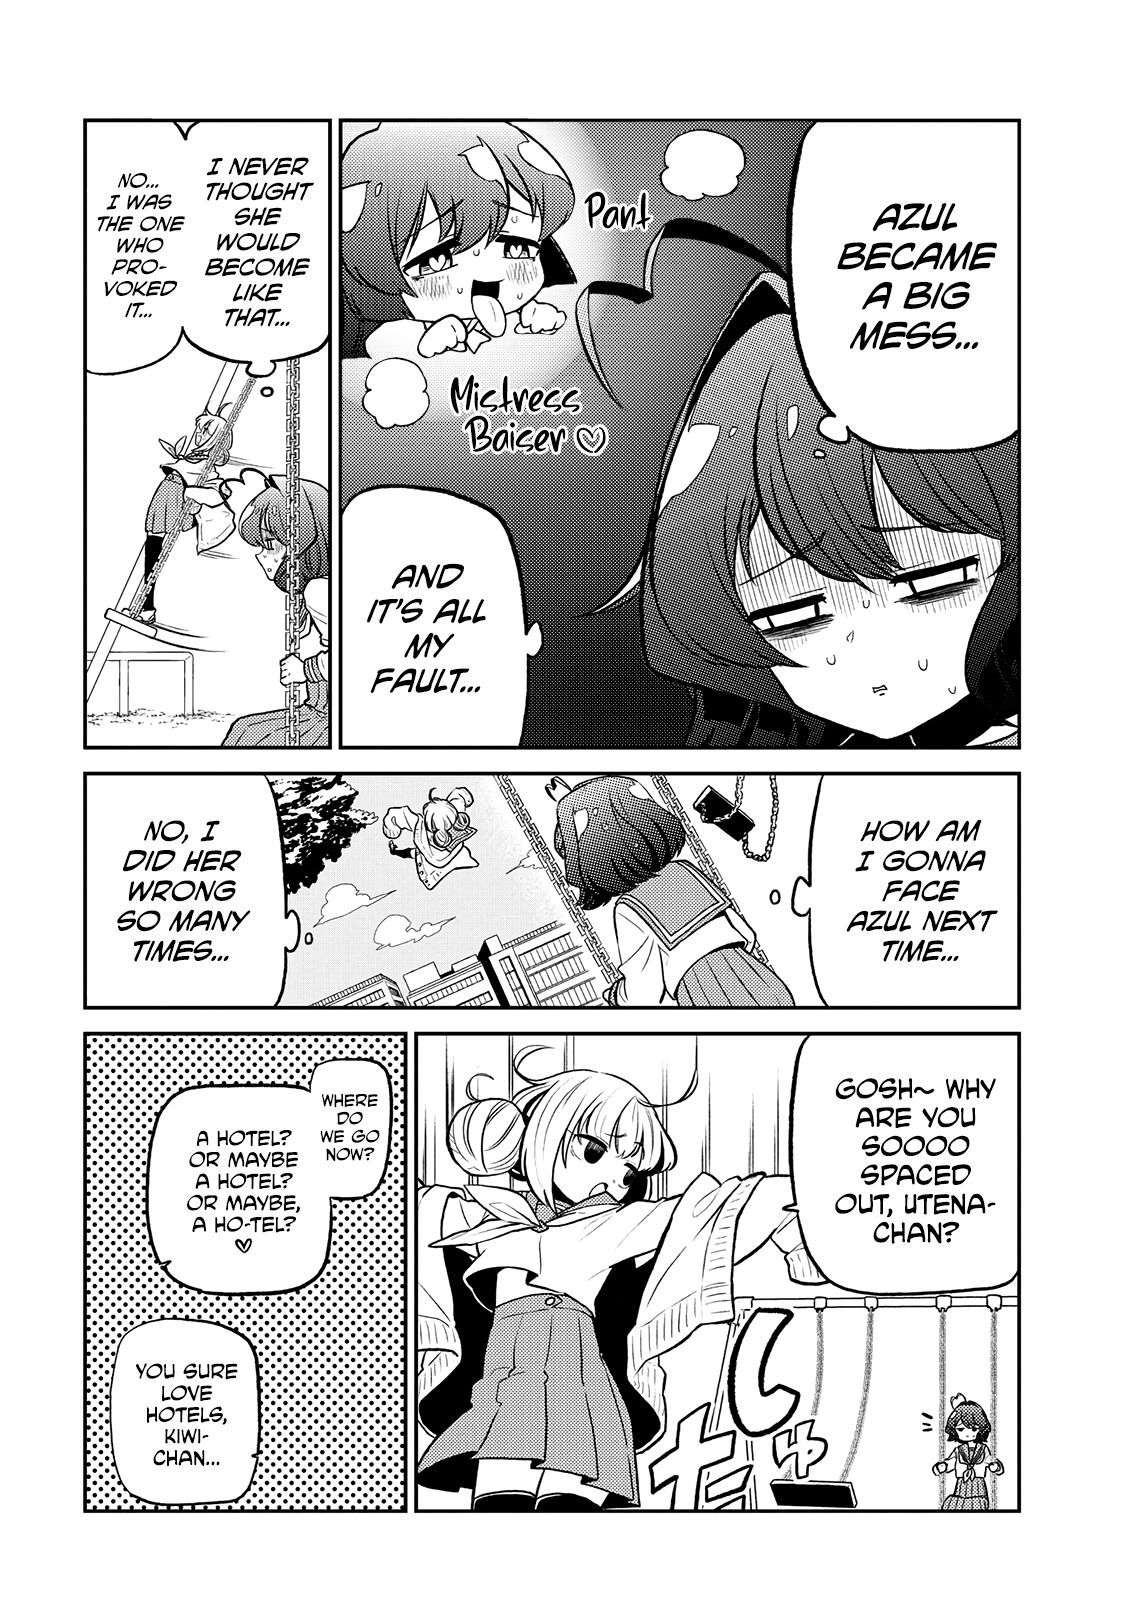 Gushing over Magical Girls - chapter 11 - #5